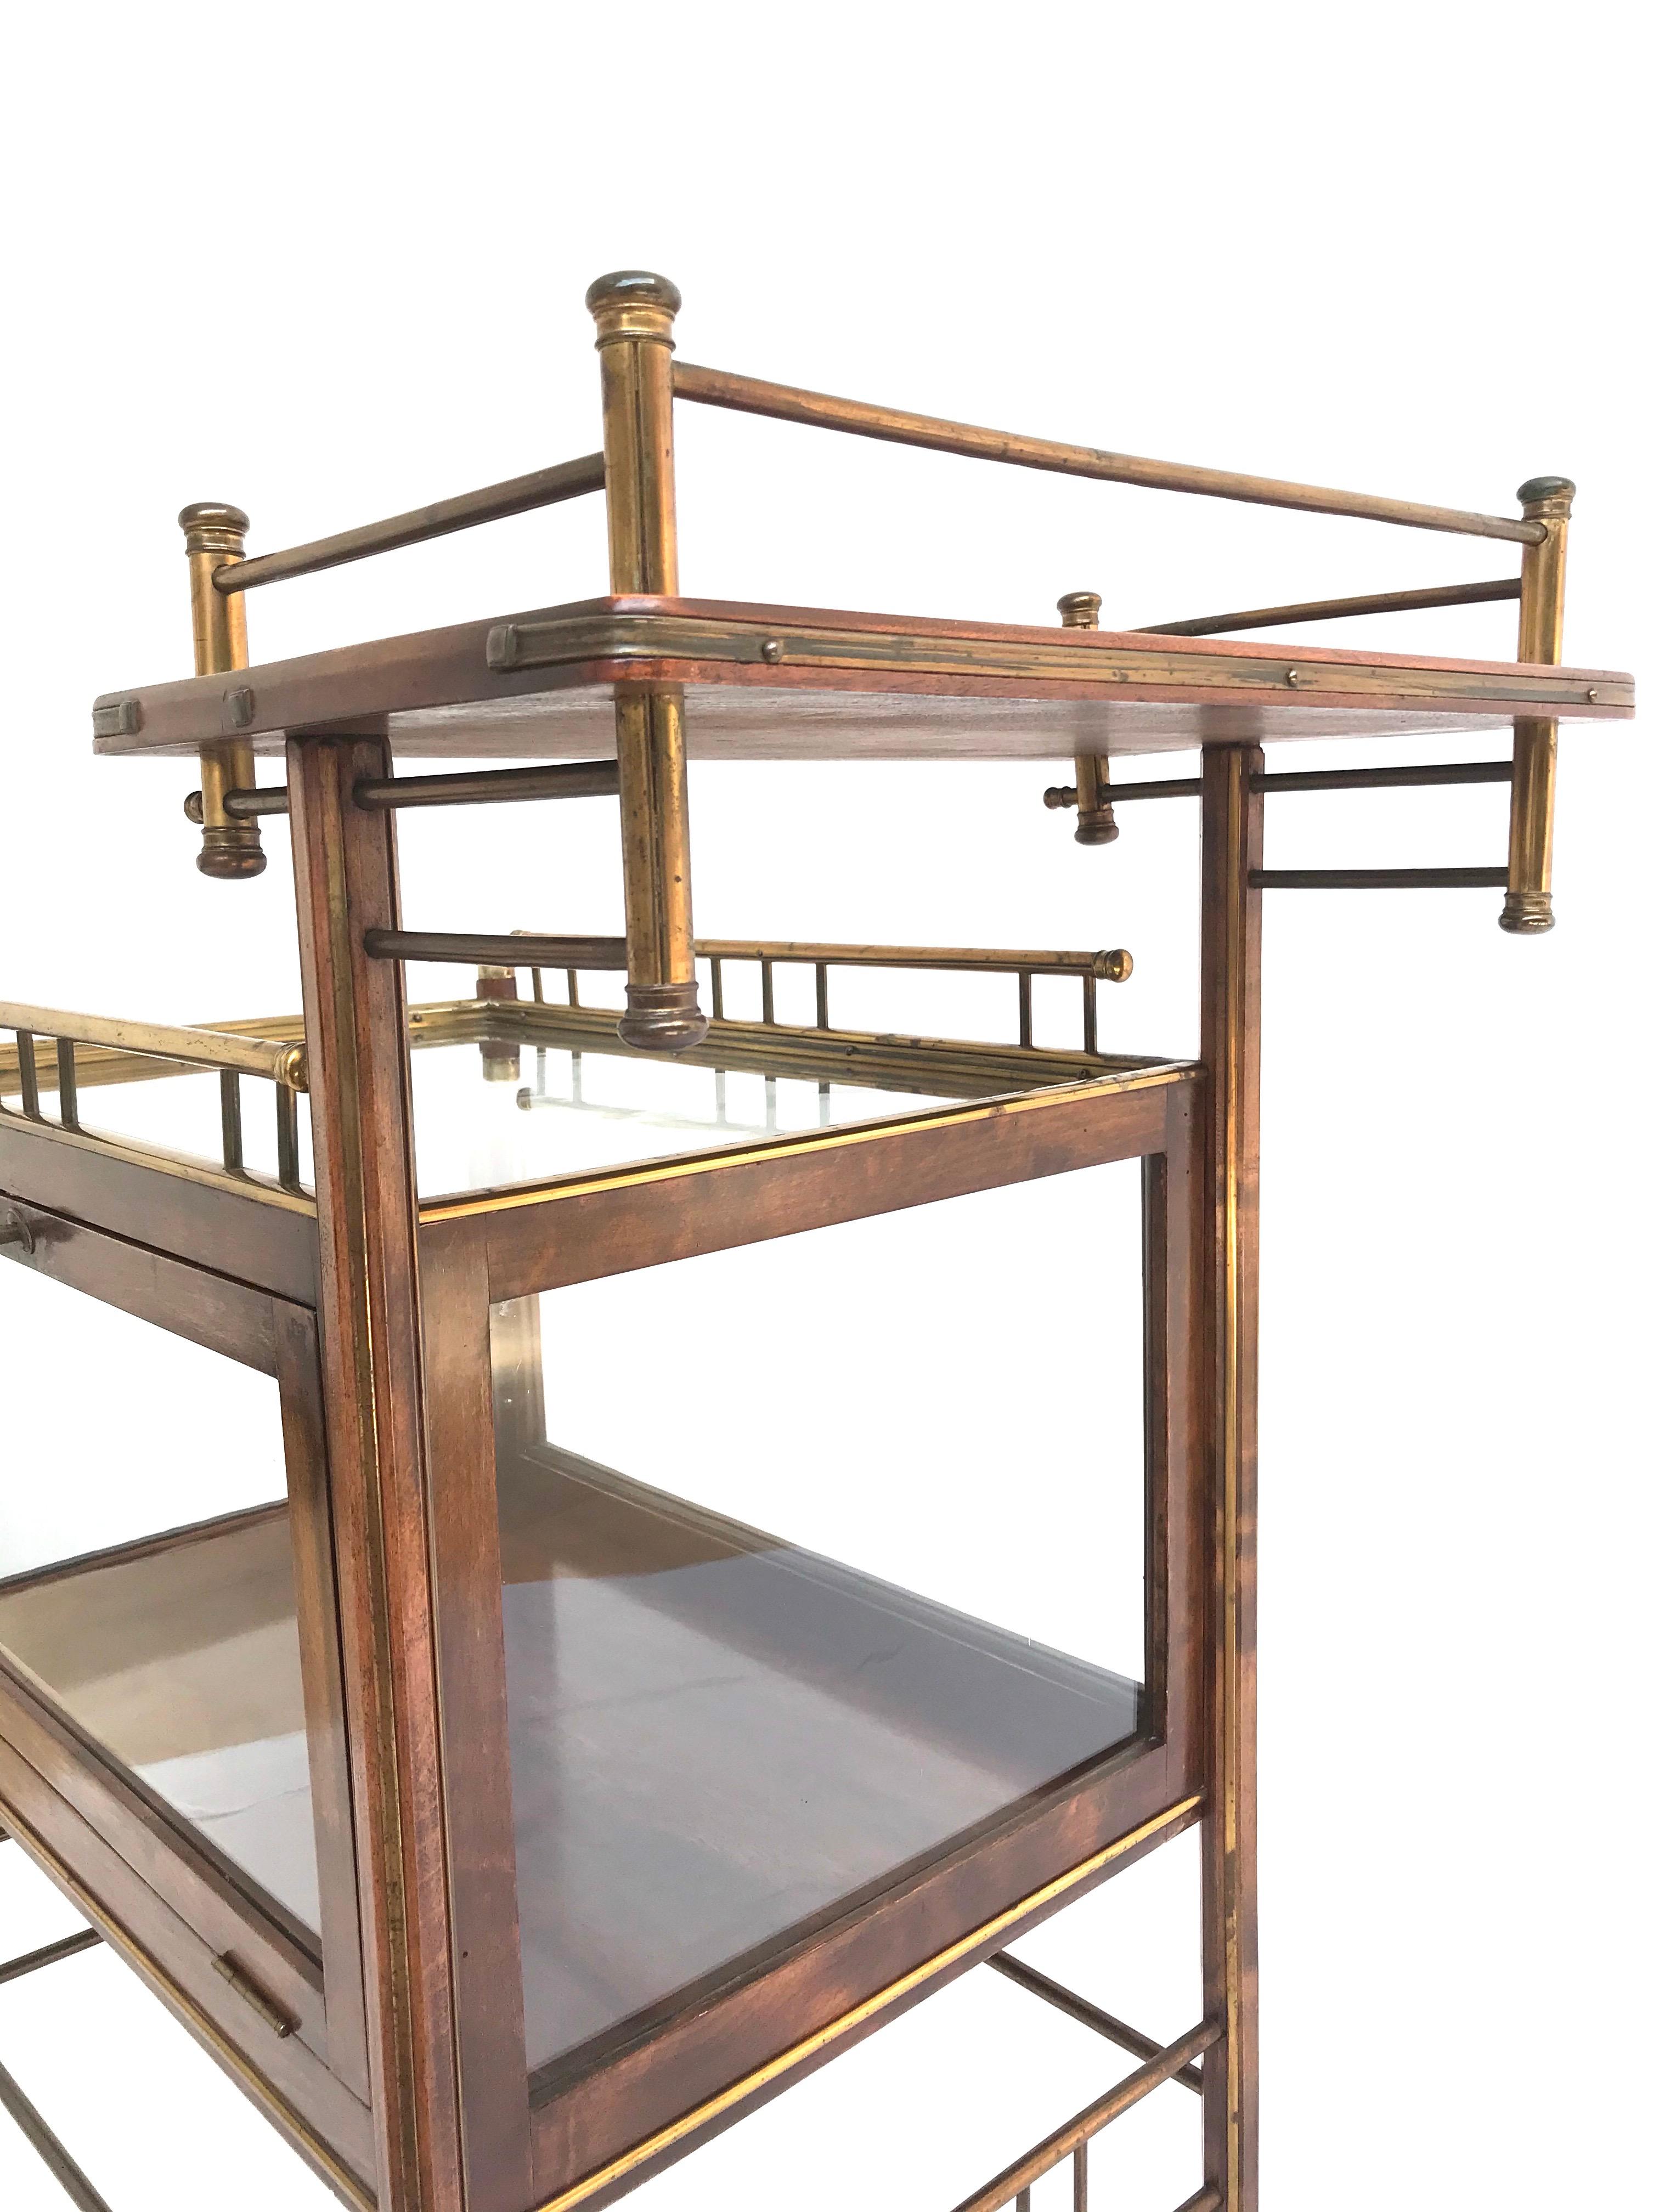 Stunning Asymmetrical Arts & Crafts Wood, Brass & Glass Drinks Trolley or Cart For Sale 5